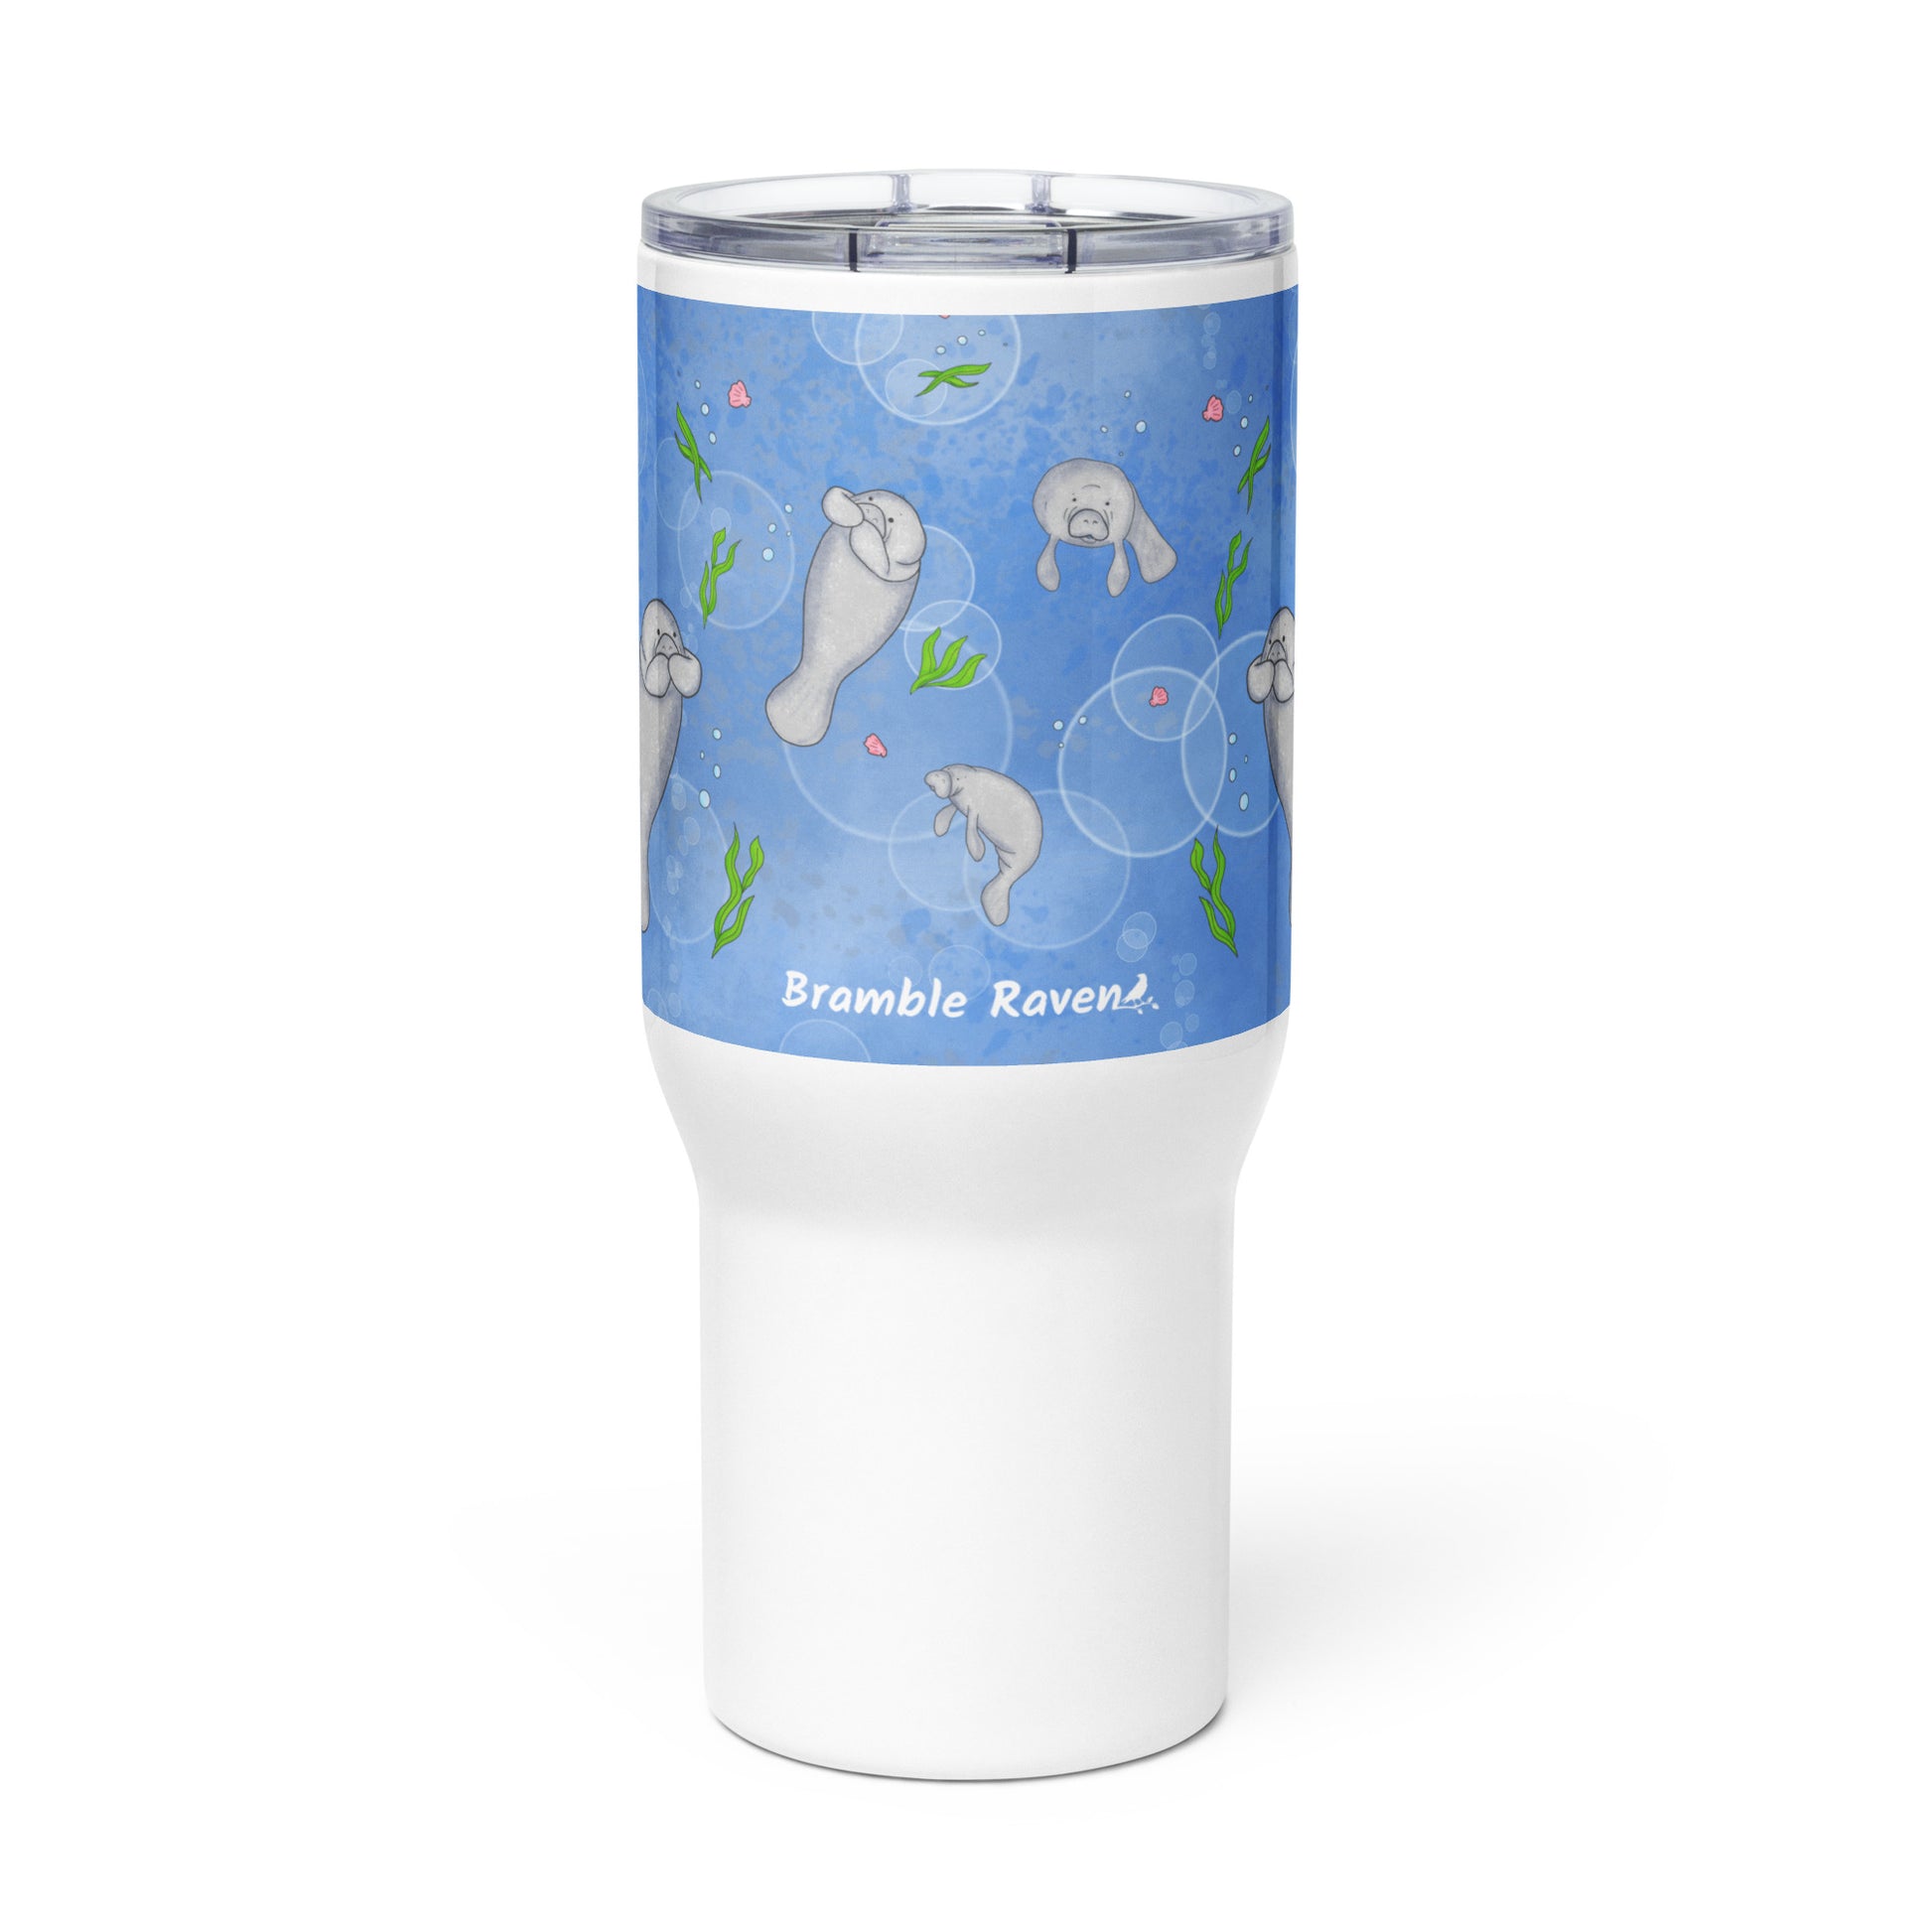 Stainless steel travel mug with handle. Holds 25 ounces of hot or cold drinks. Has wraparound illustrated manatees design. Fits most car cup holders. Comes with spill-proof BPA-free plastic lid. Front view of travel mug.